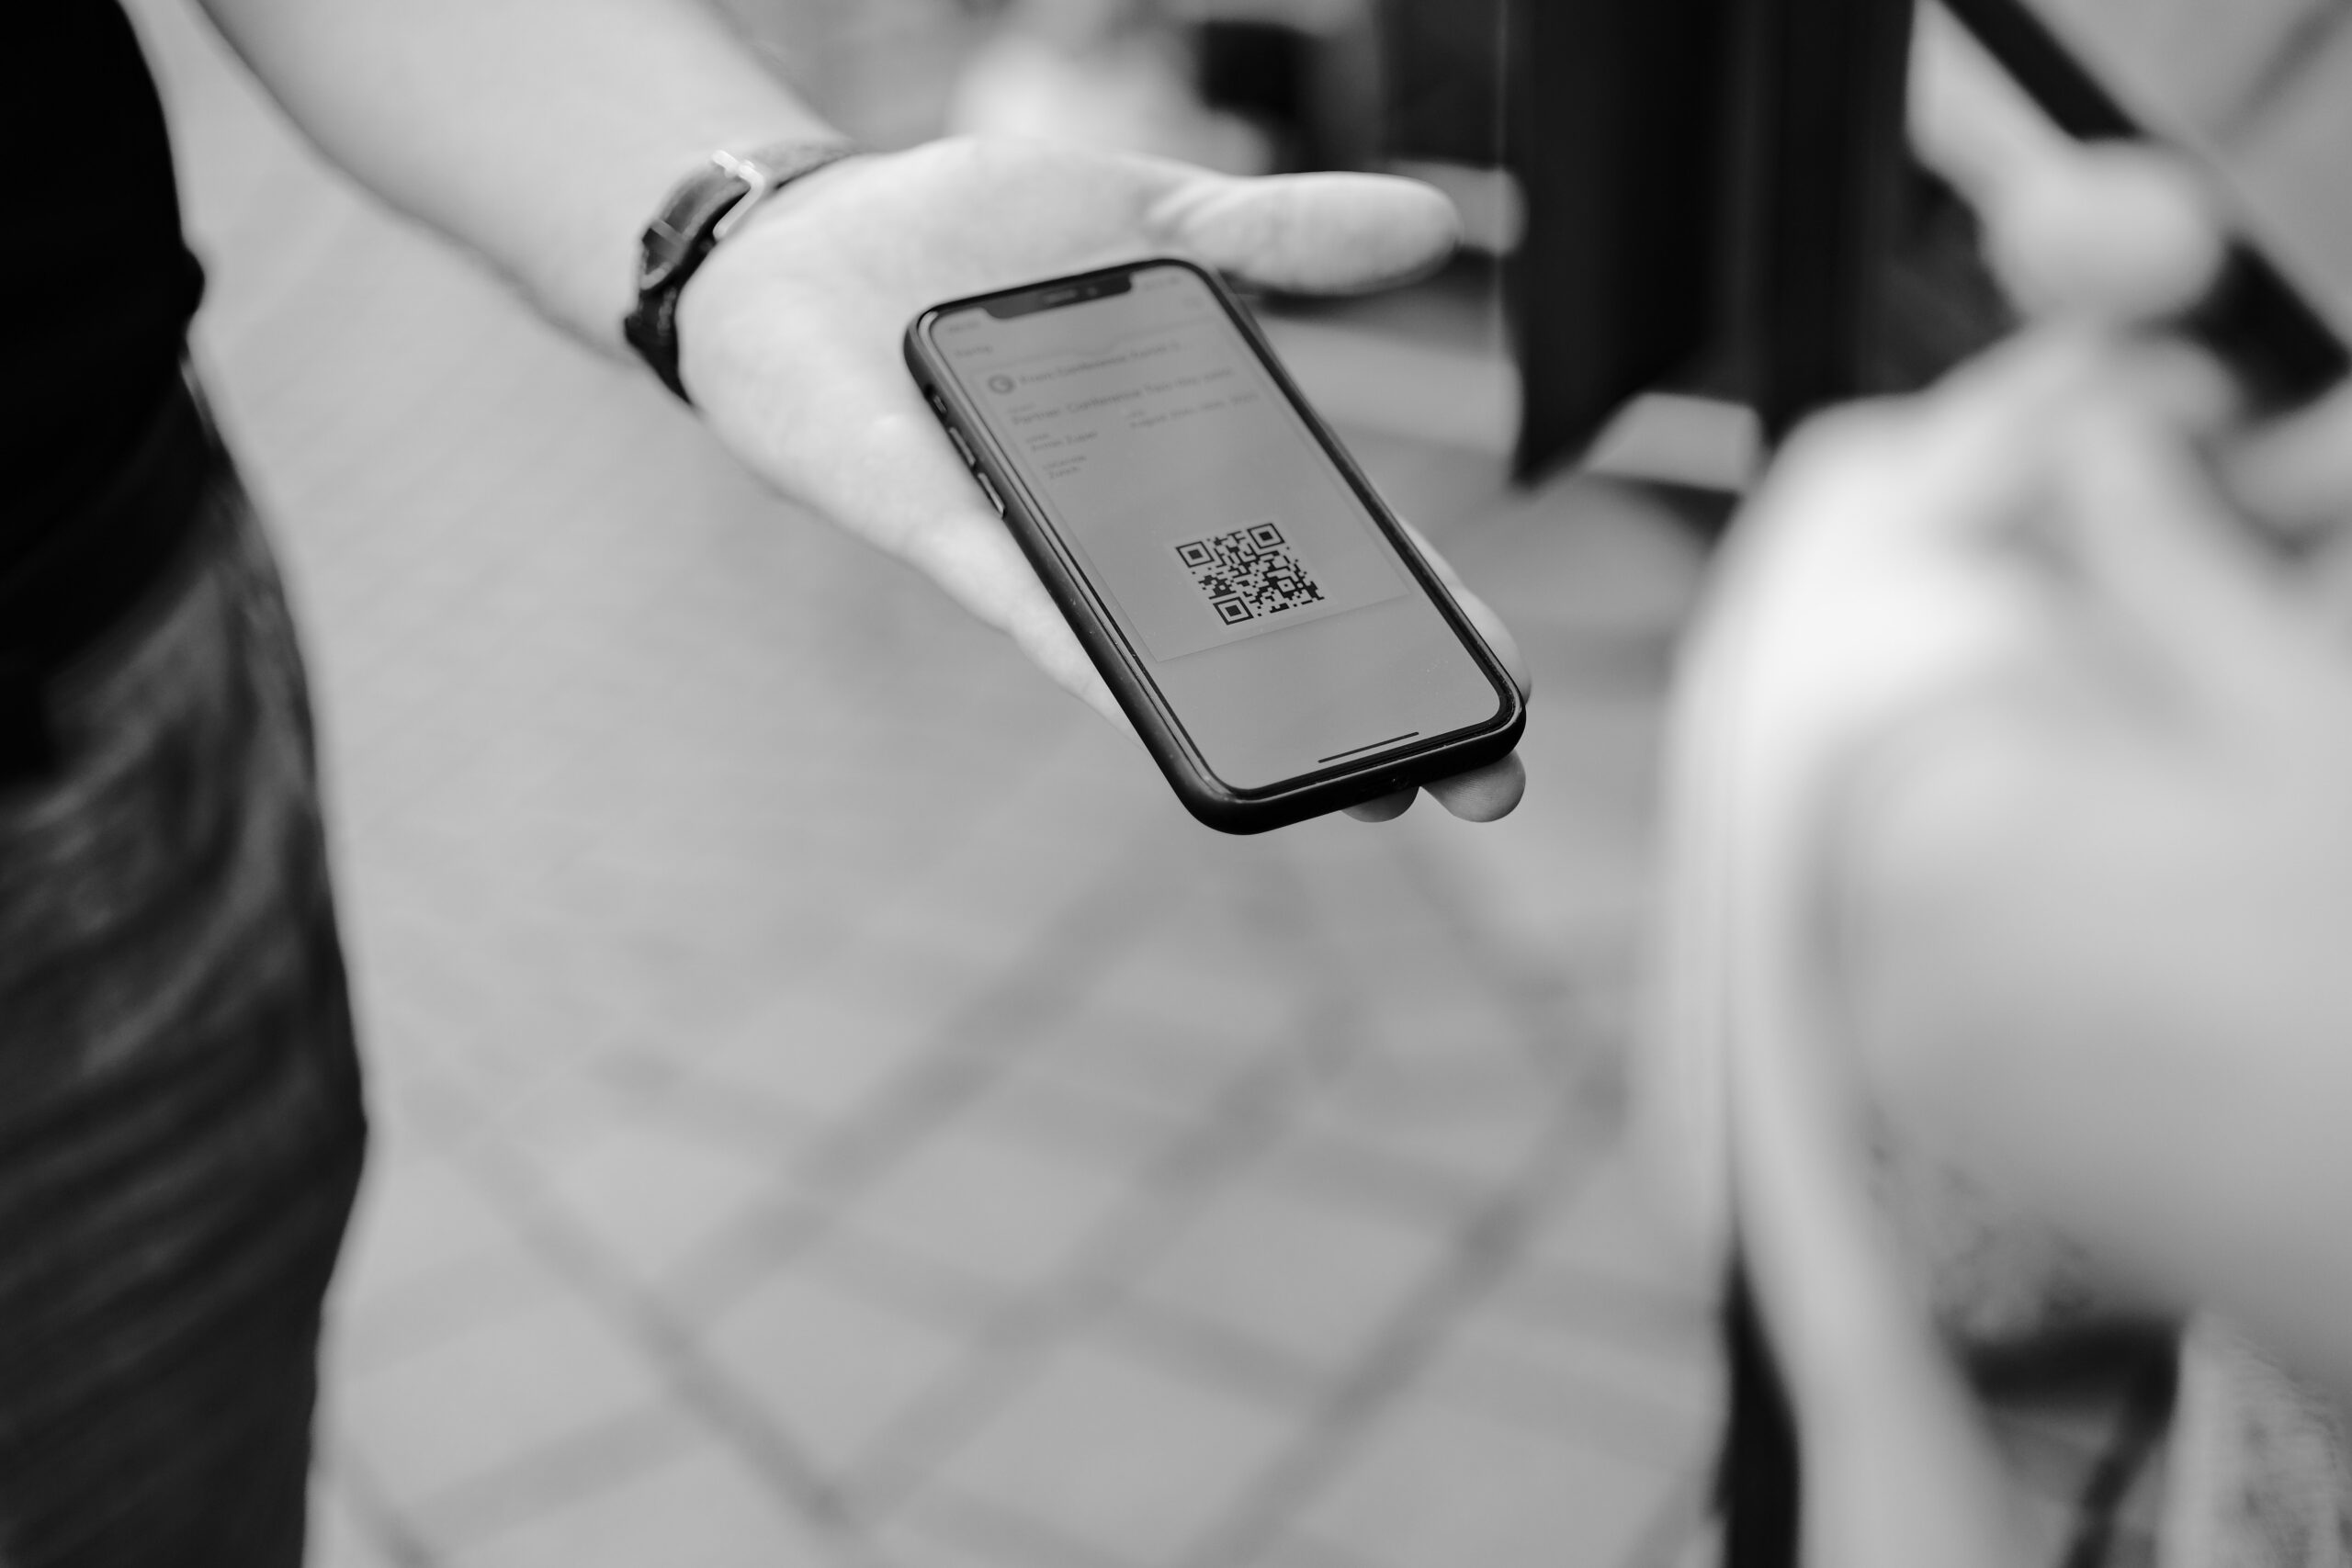 person holding a cell phone showing a QR code on the screen.